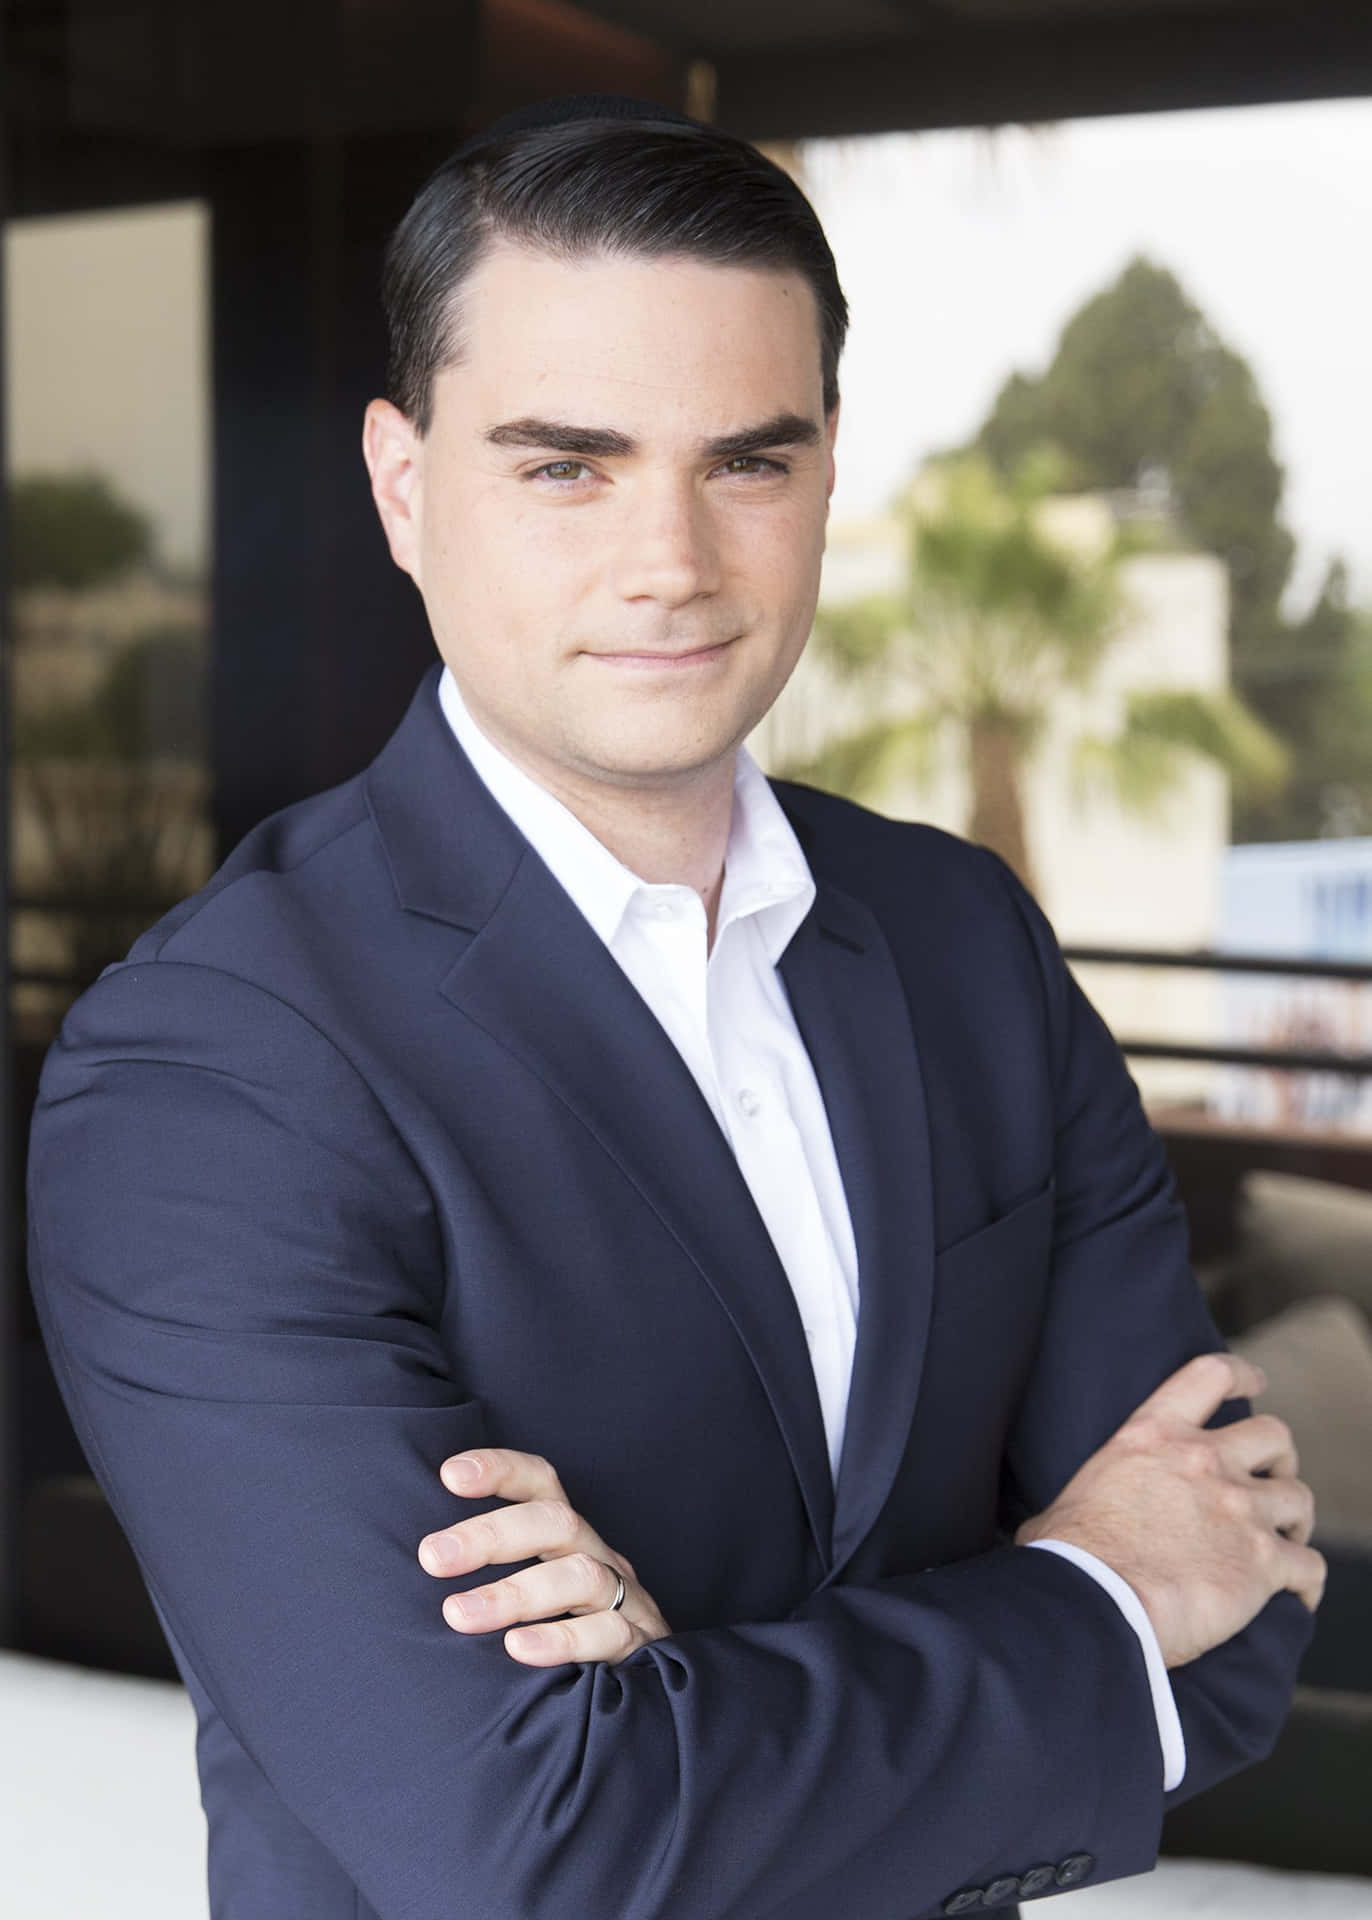 Ben Shapiro, a Political Commentator and Author